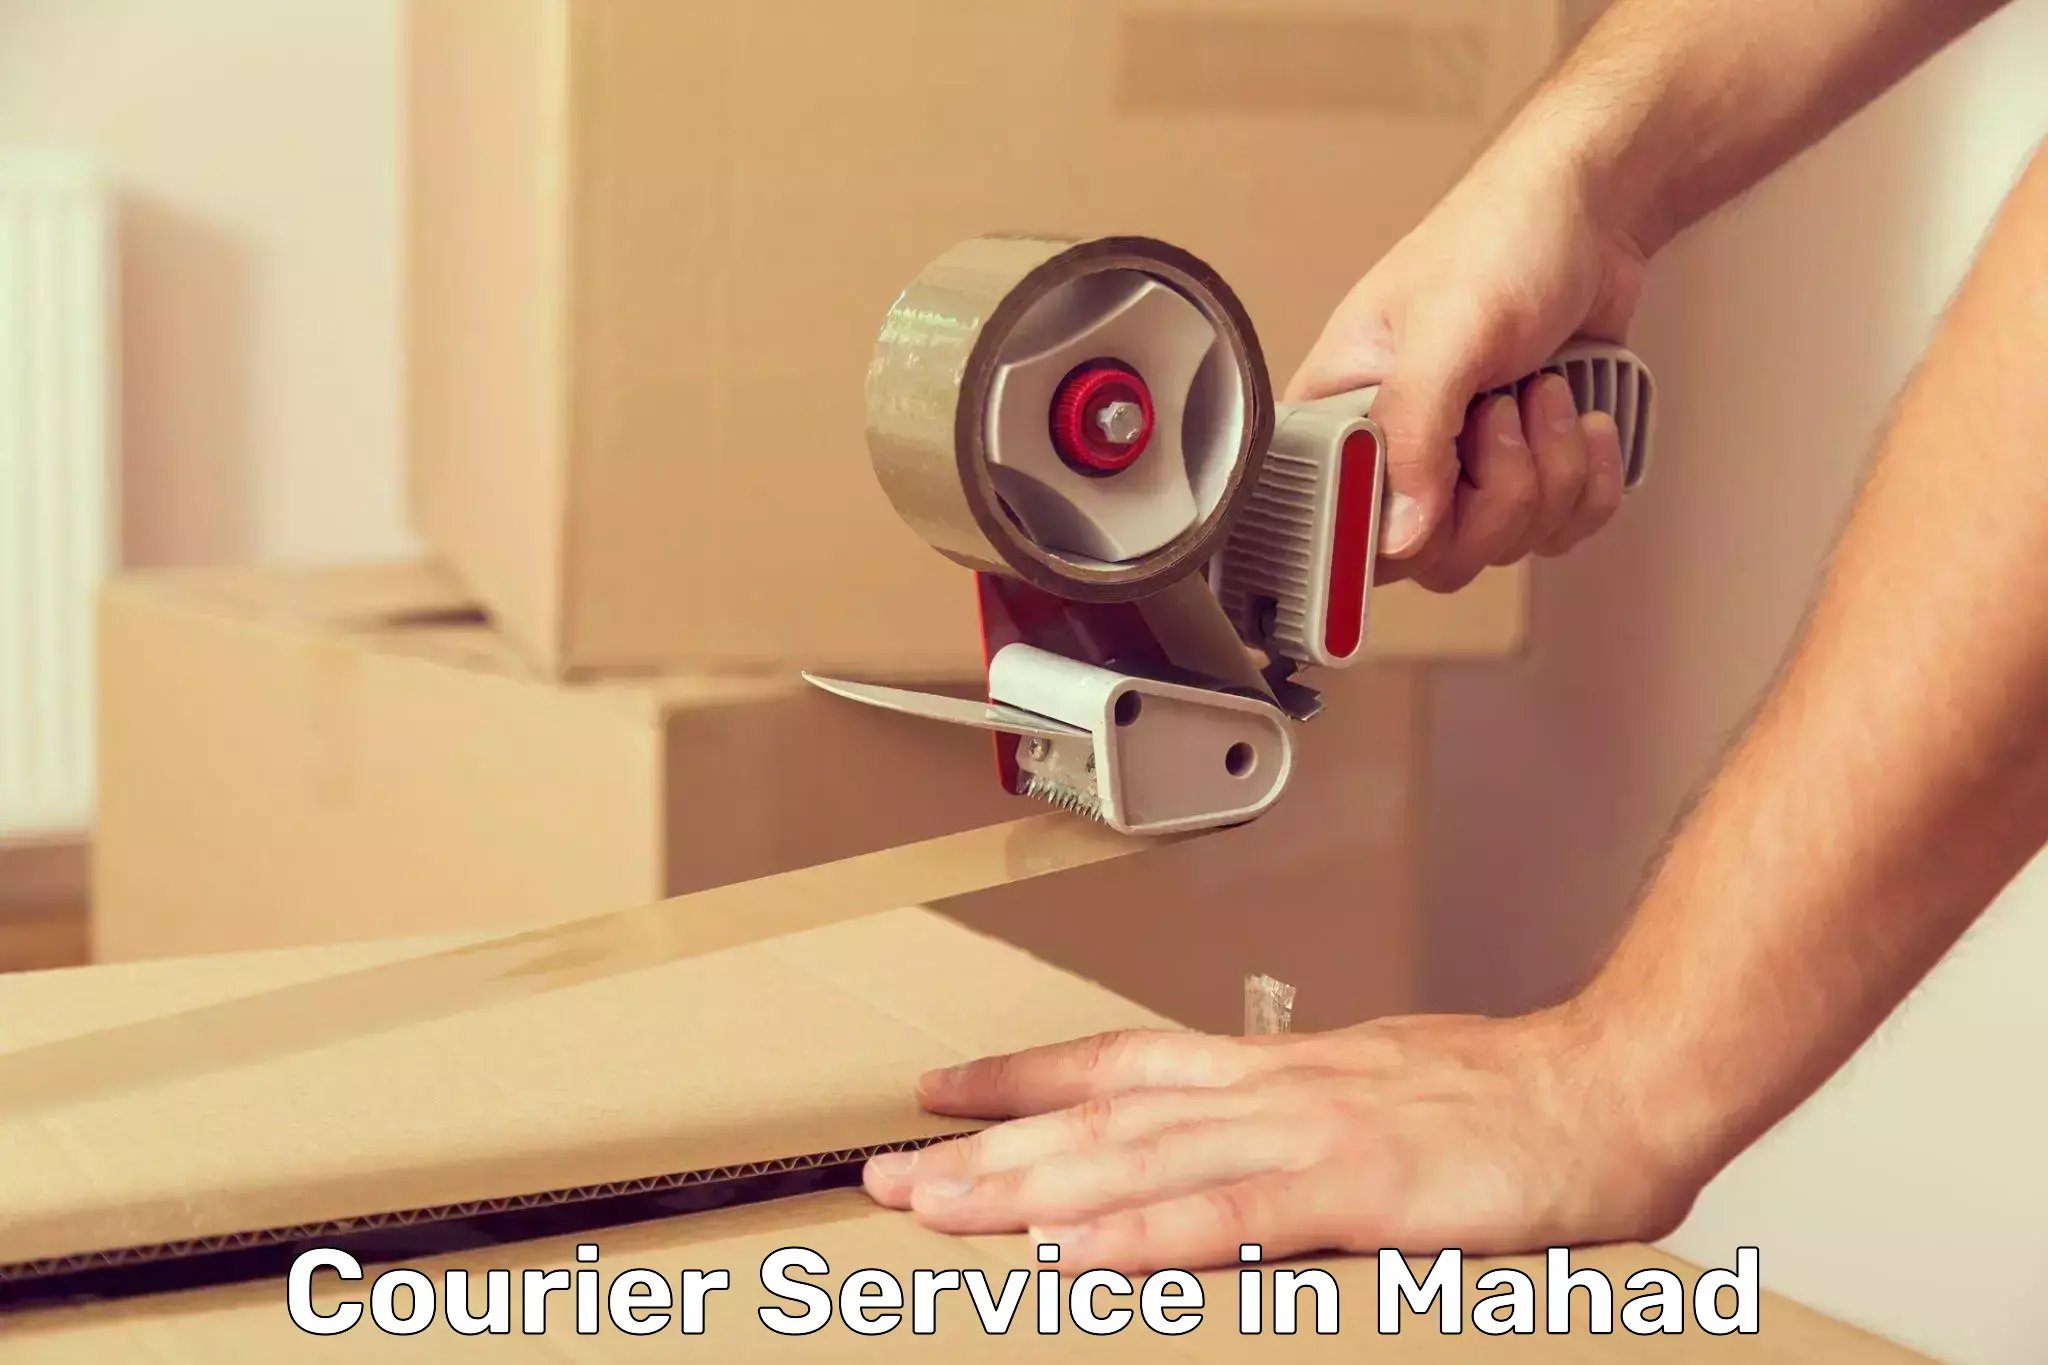 Rapid shipping services in Mahad